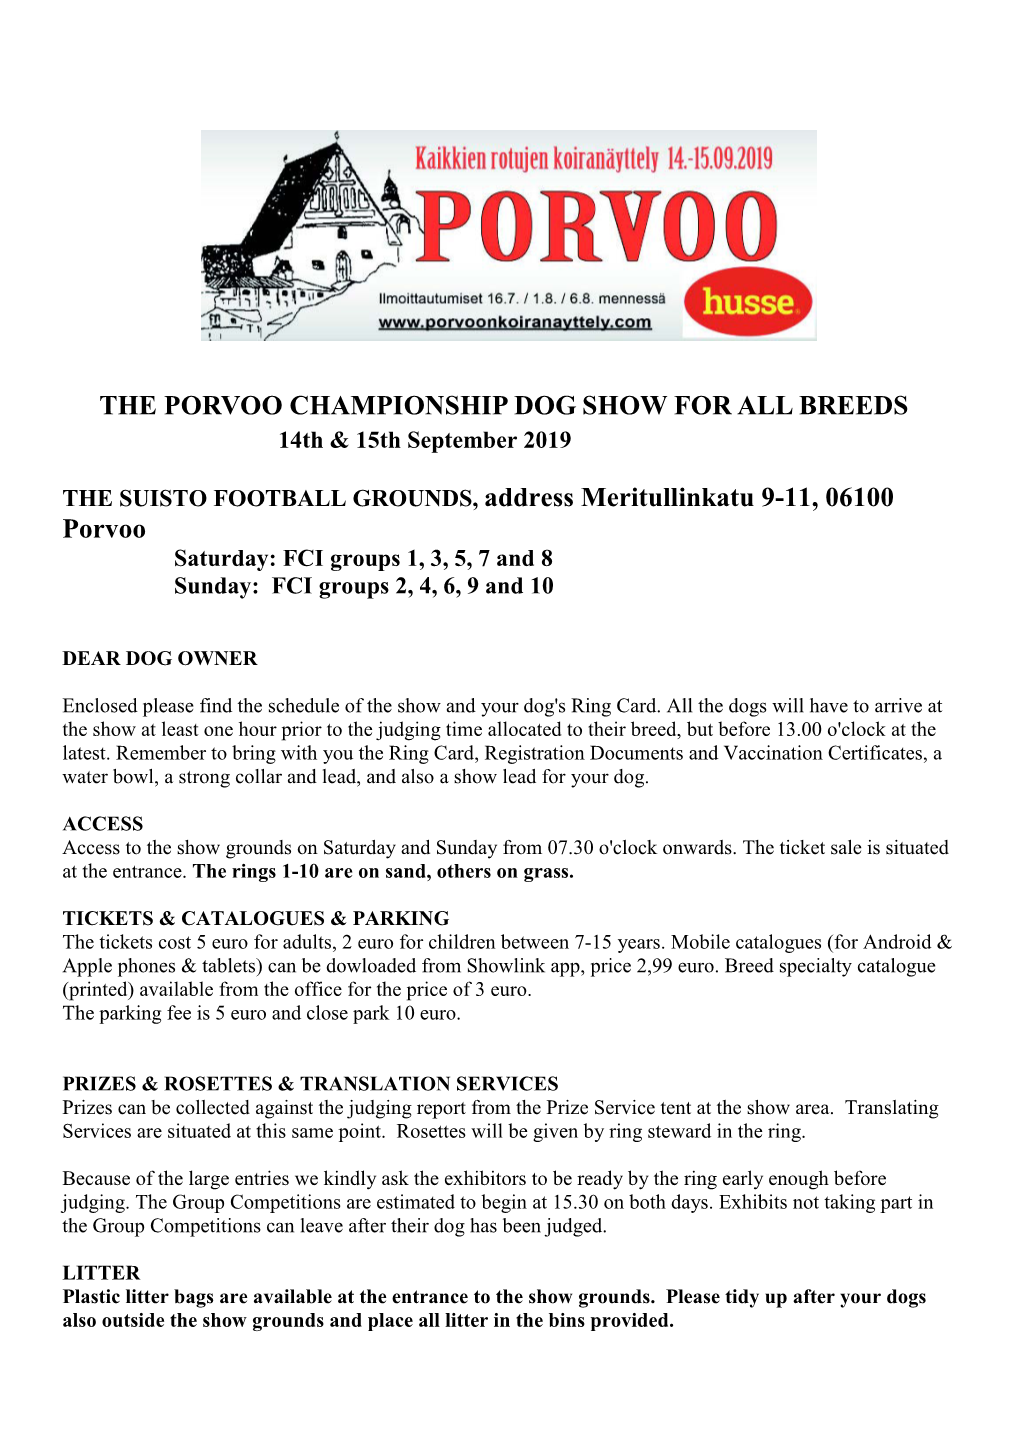 PORVOO CHAMPIONSHIP DOG SHOW for ALL BREEDS 14Th & 15Th September 2019